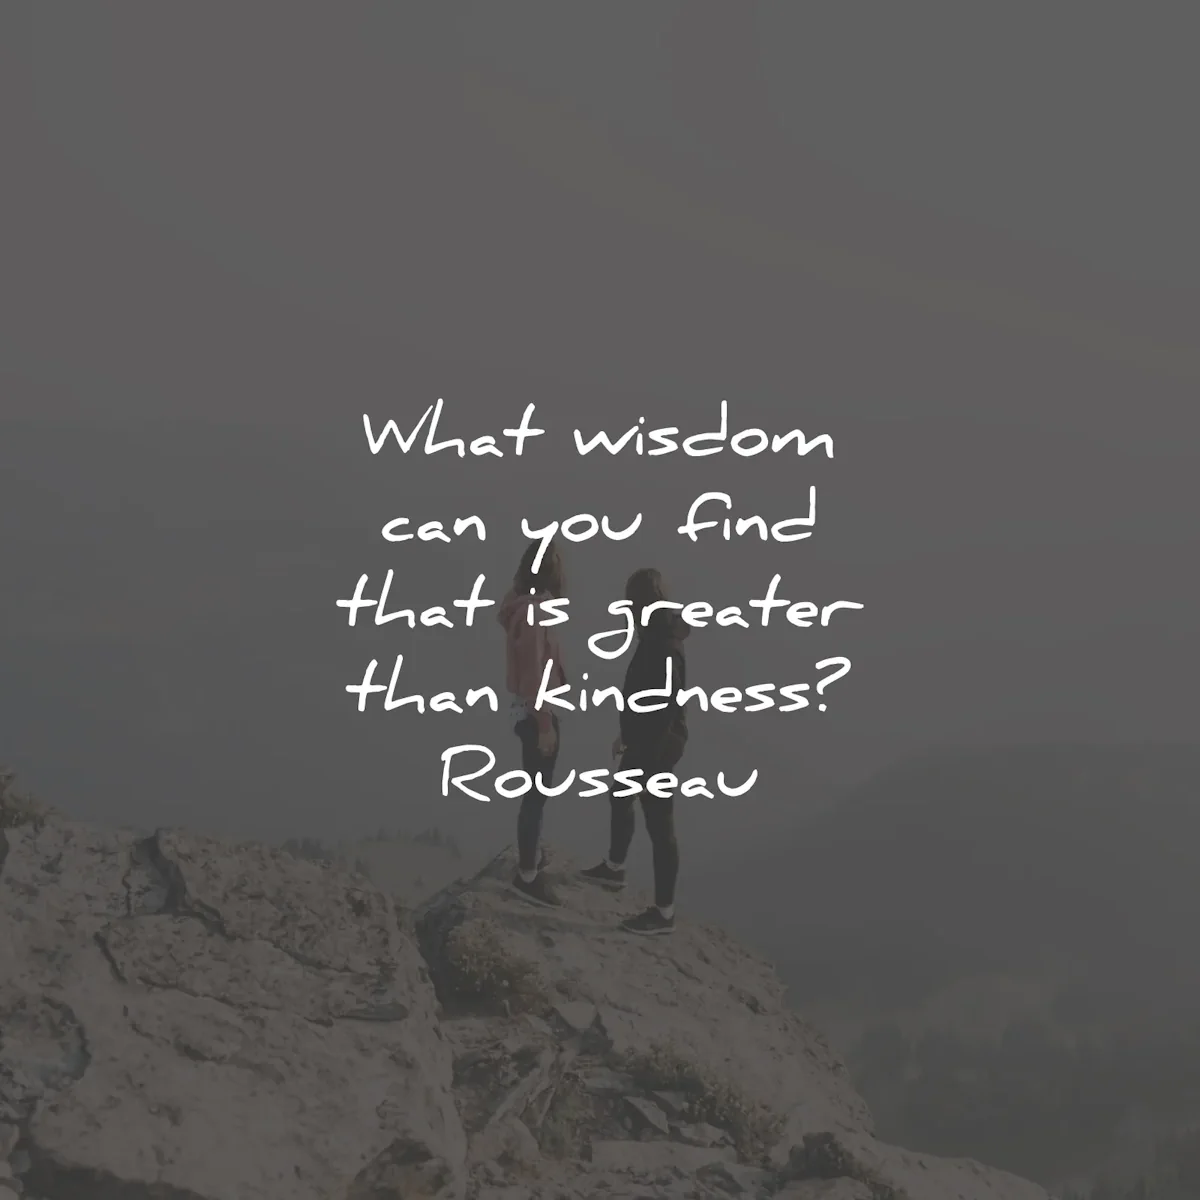 kindness quotes what wisdom find greater rousseau wisdom